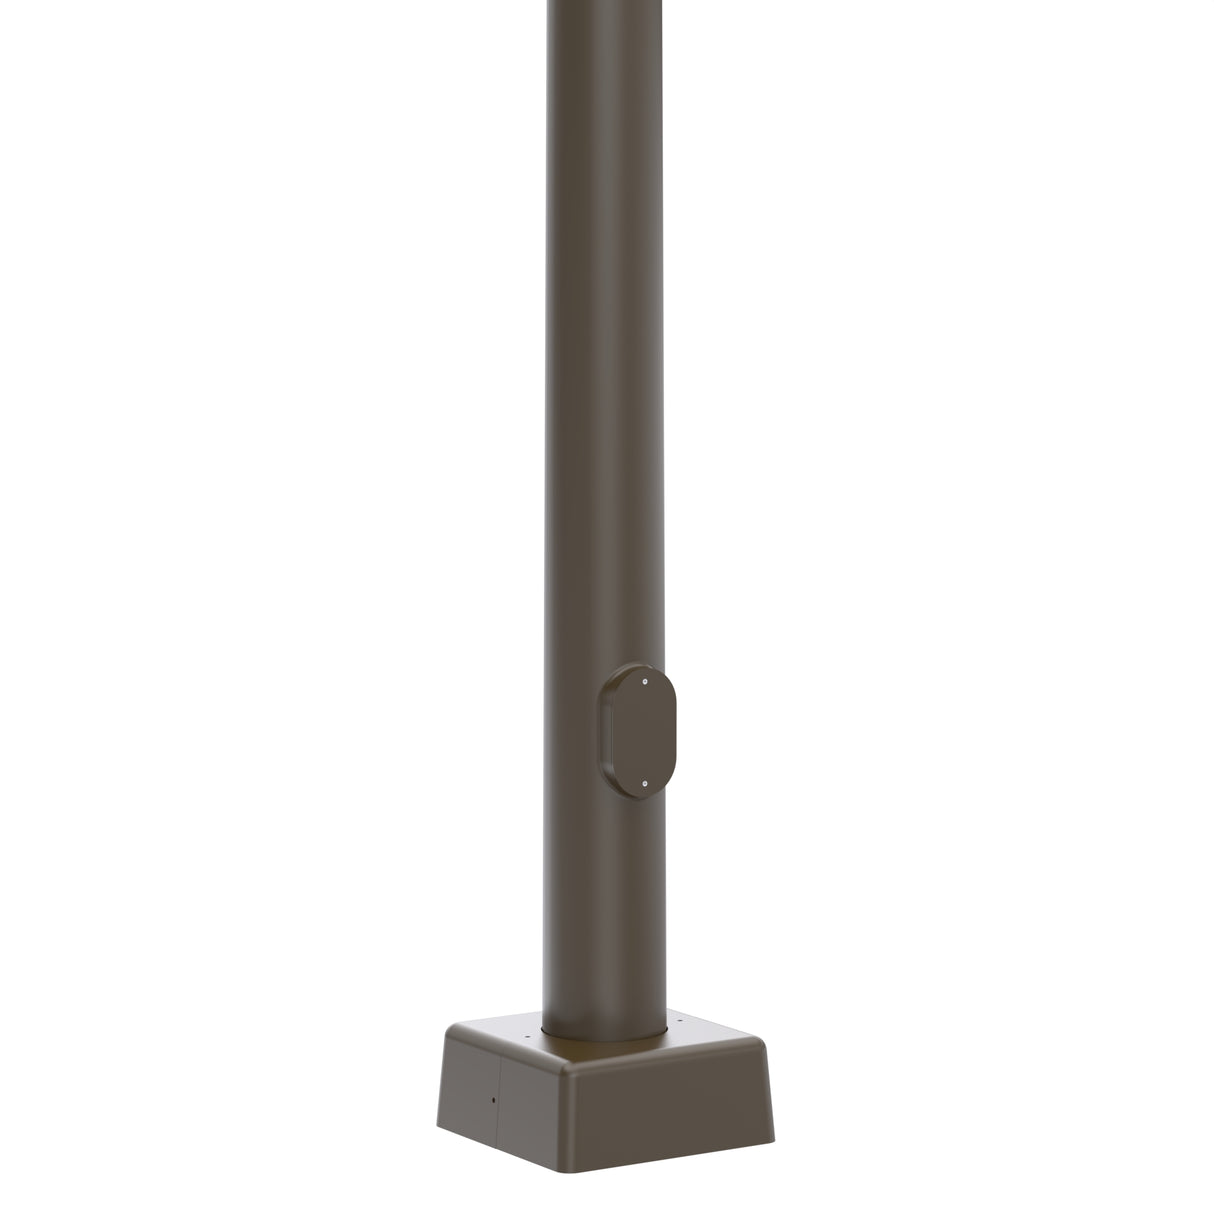 35' Tall x 8.5" Base OD x 3.6" Top OD x 11ga Thick, Round Tapered Steel, Anchor Base Light Pole